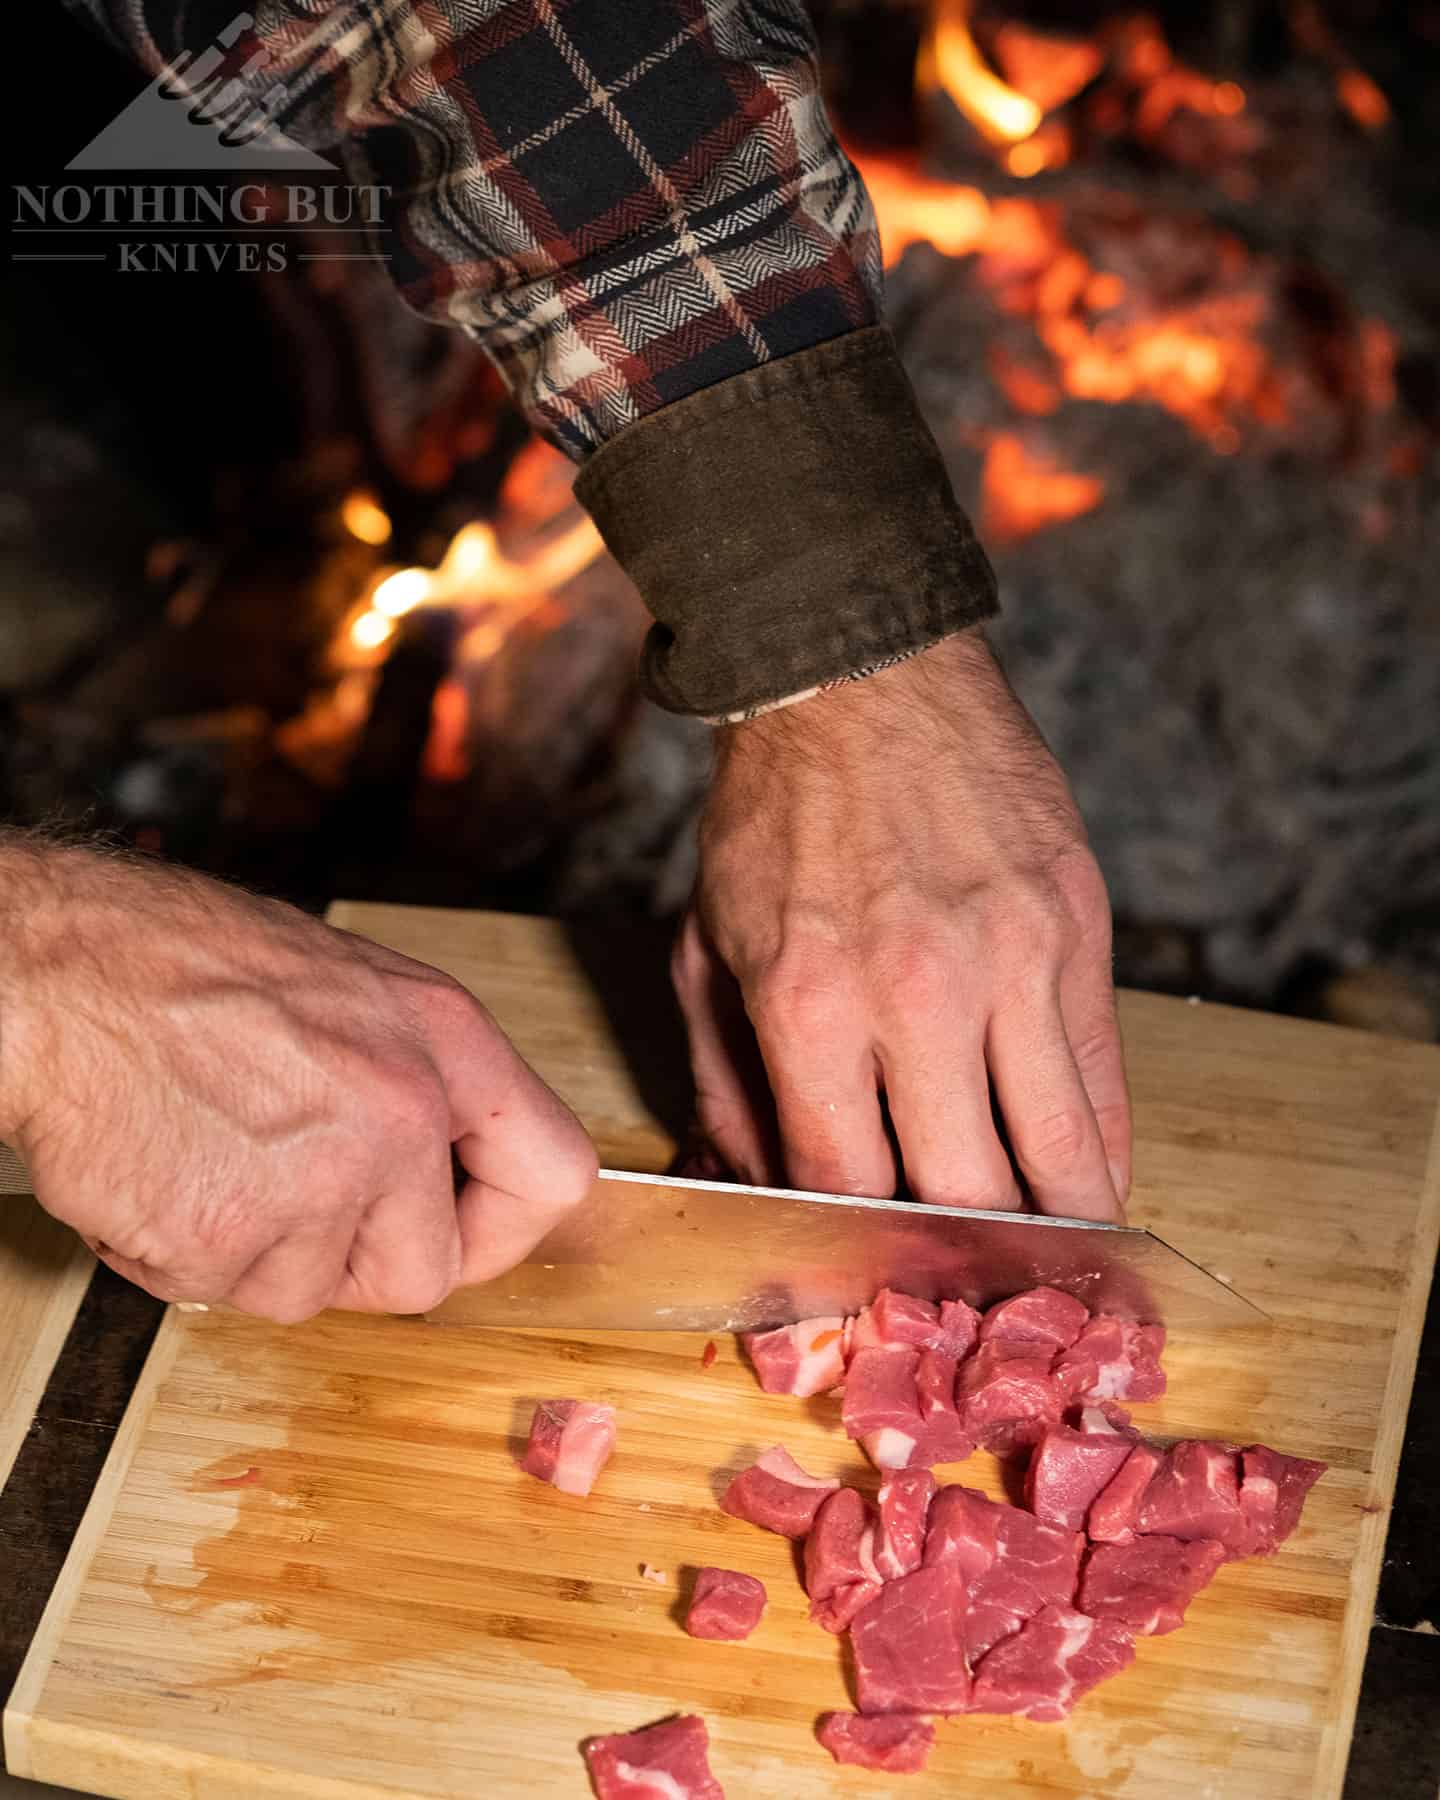 The Overland is an excellent chef knife option if you cook a lot of meat.